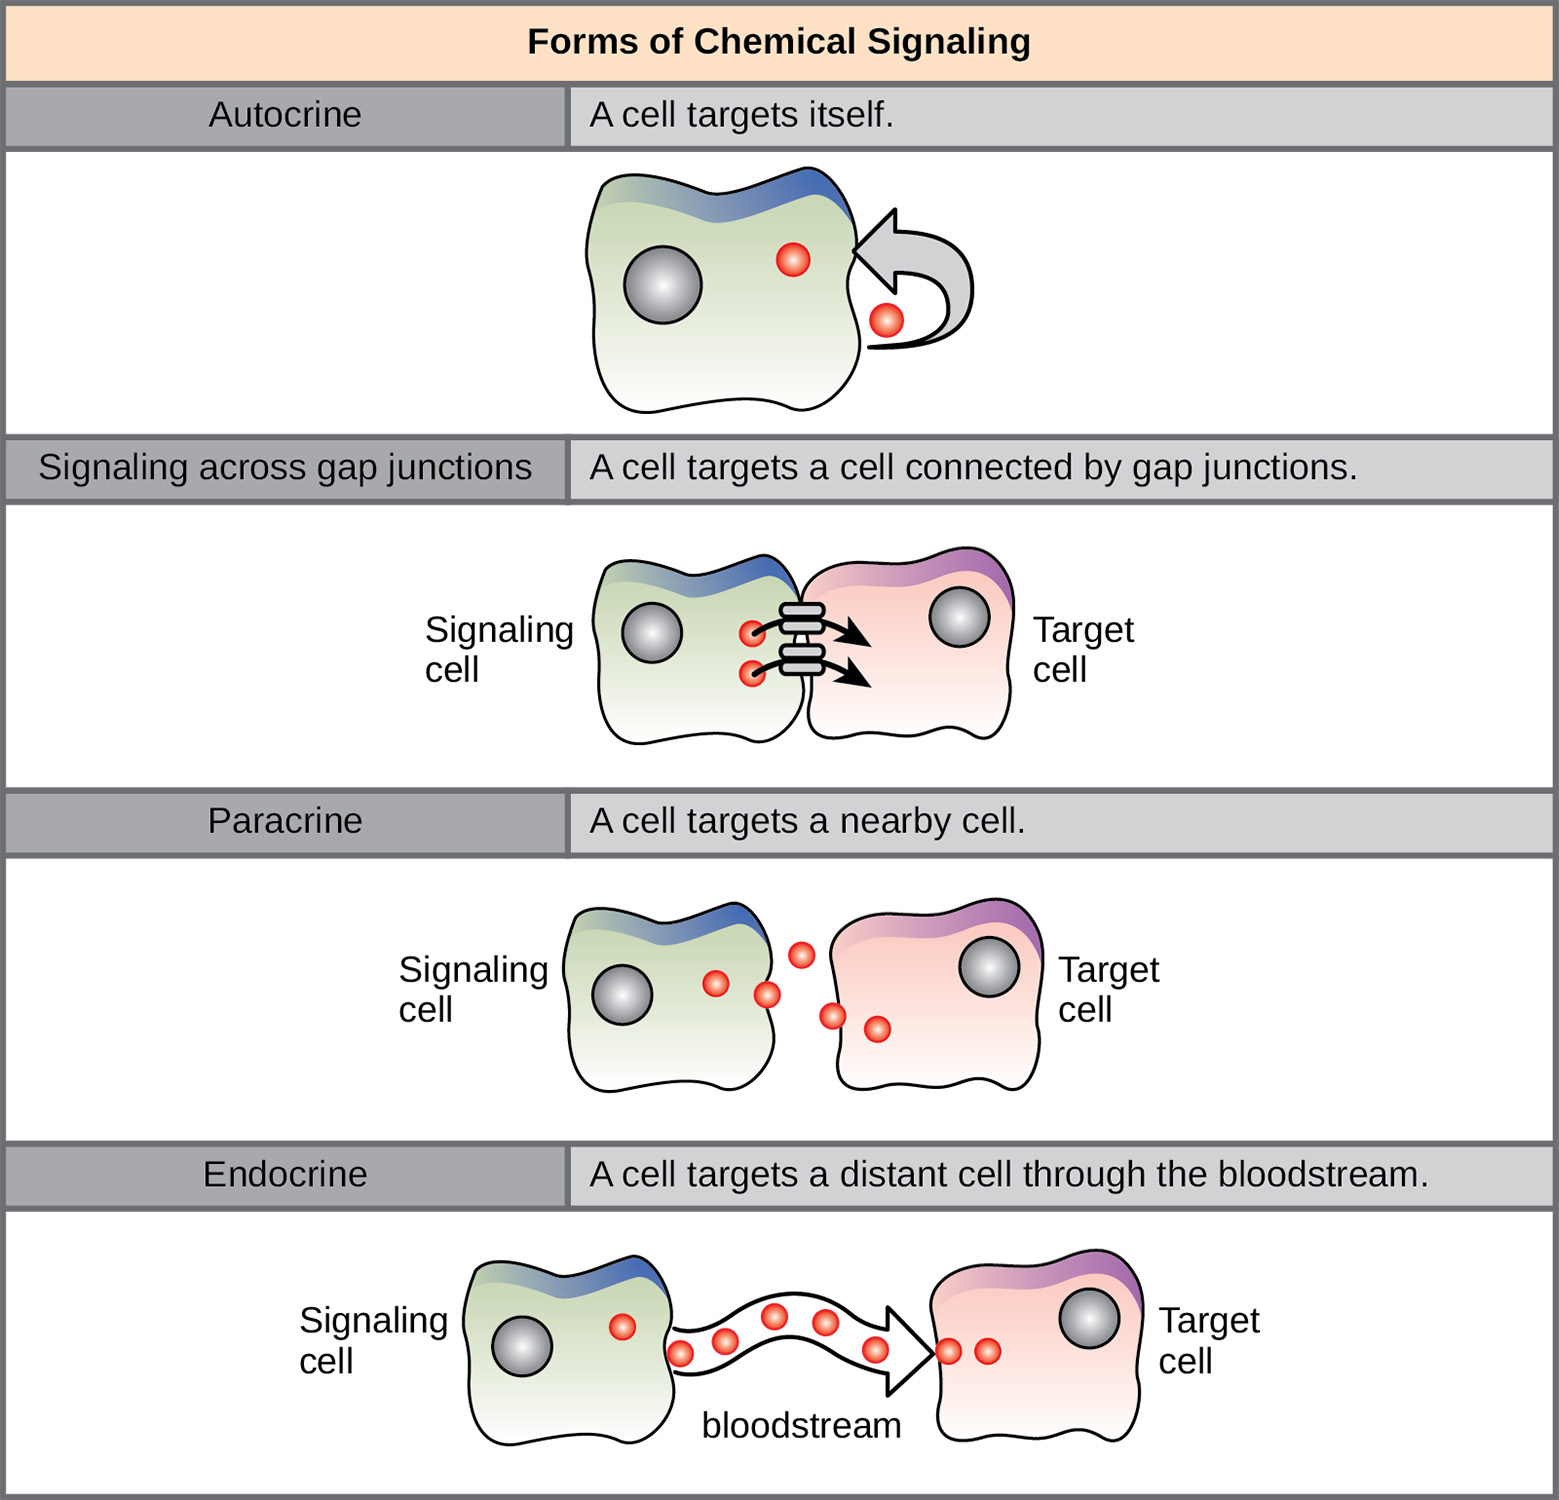 The illustration shows four forms of chemical signaling. In autocrine signaling, a cell targets itself. In signaling across a gap junction, a cell targets a cell connected via gap junctions. In paracrine signaling, a cell targets a nearby cell. In endocrine signaling, a cell targets a distant cell via the bloodstream